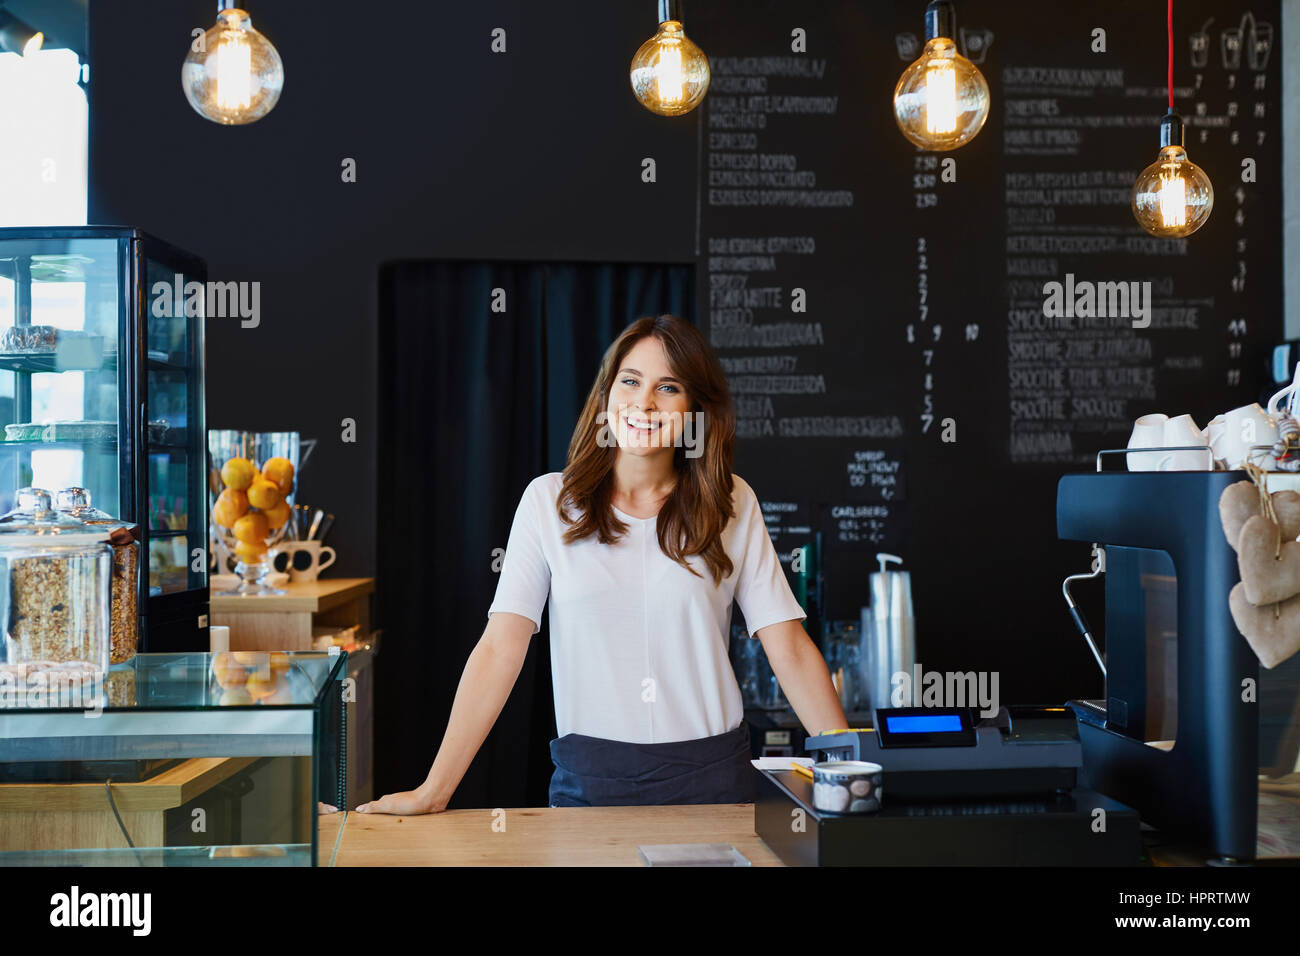 Young female barista standing behind the bar in cafe smiling Stock Photo